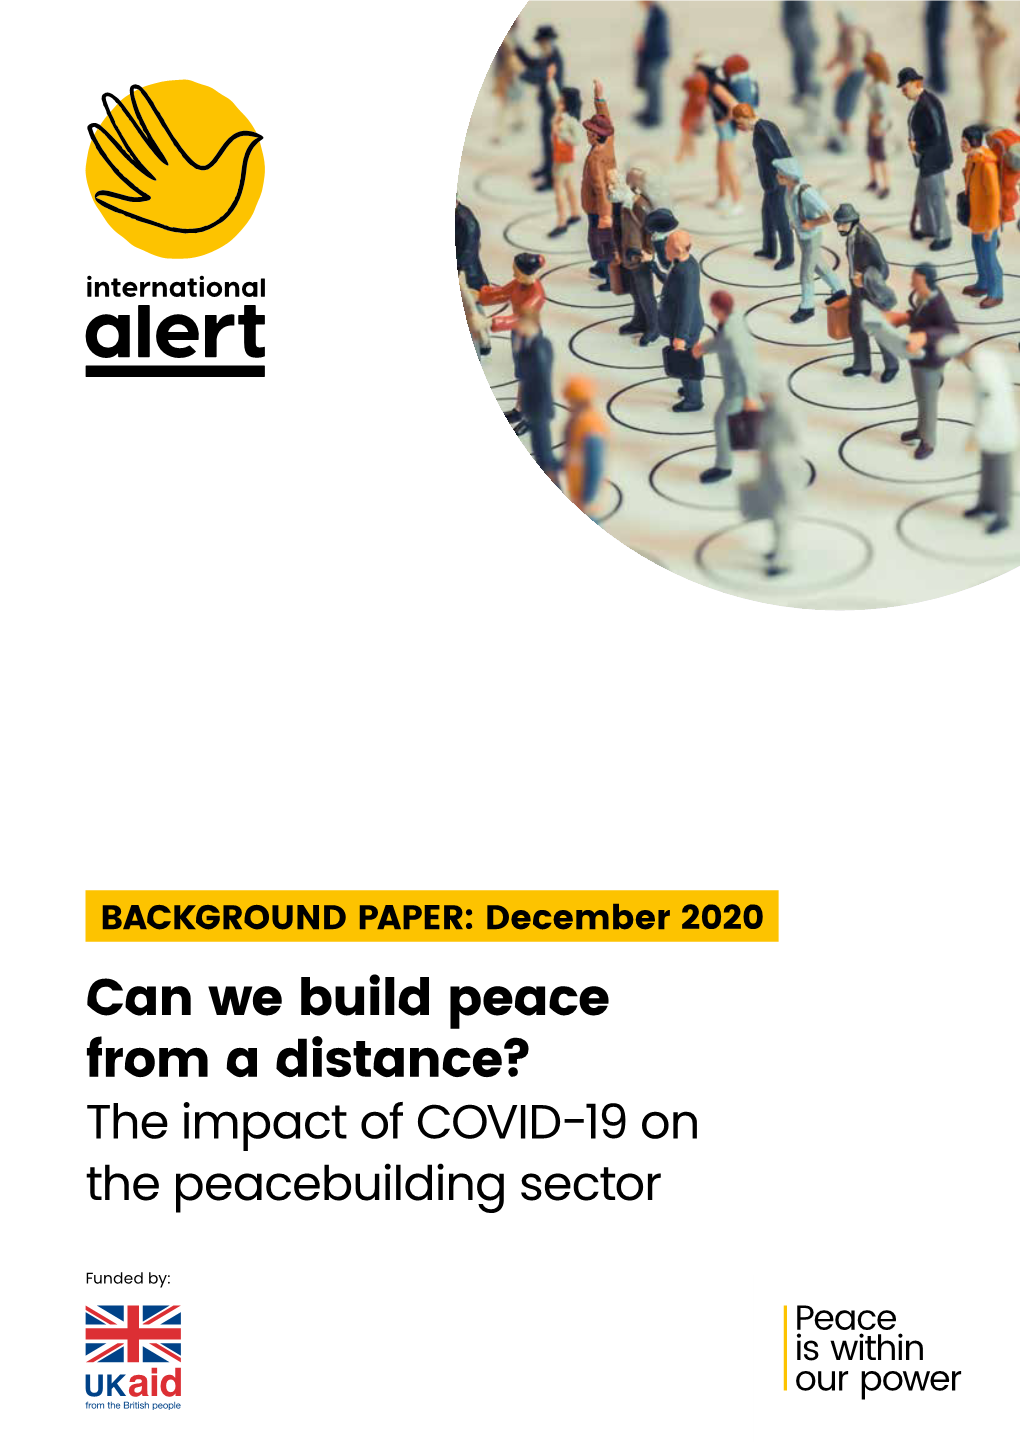 Can We Build Peace from a Distance? the Impact of COVID-19 on the Peacebuilding Sector